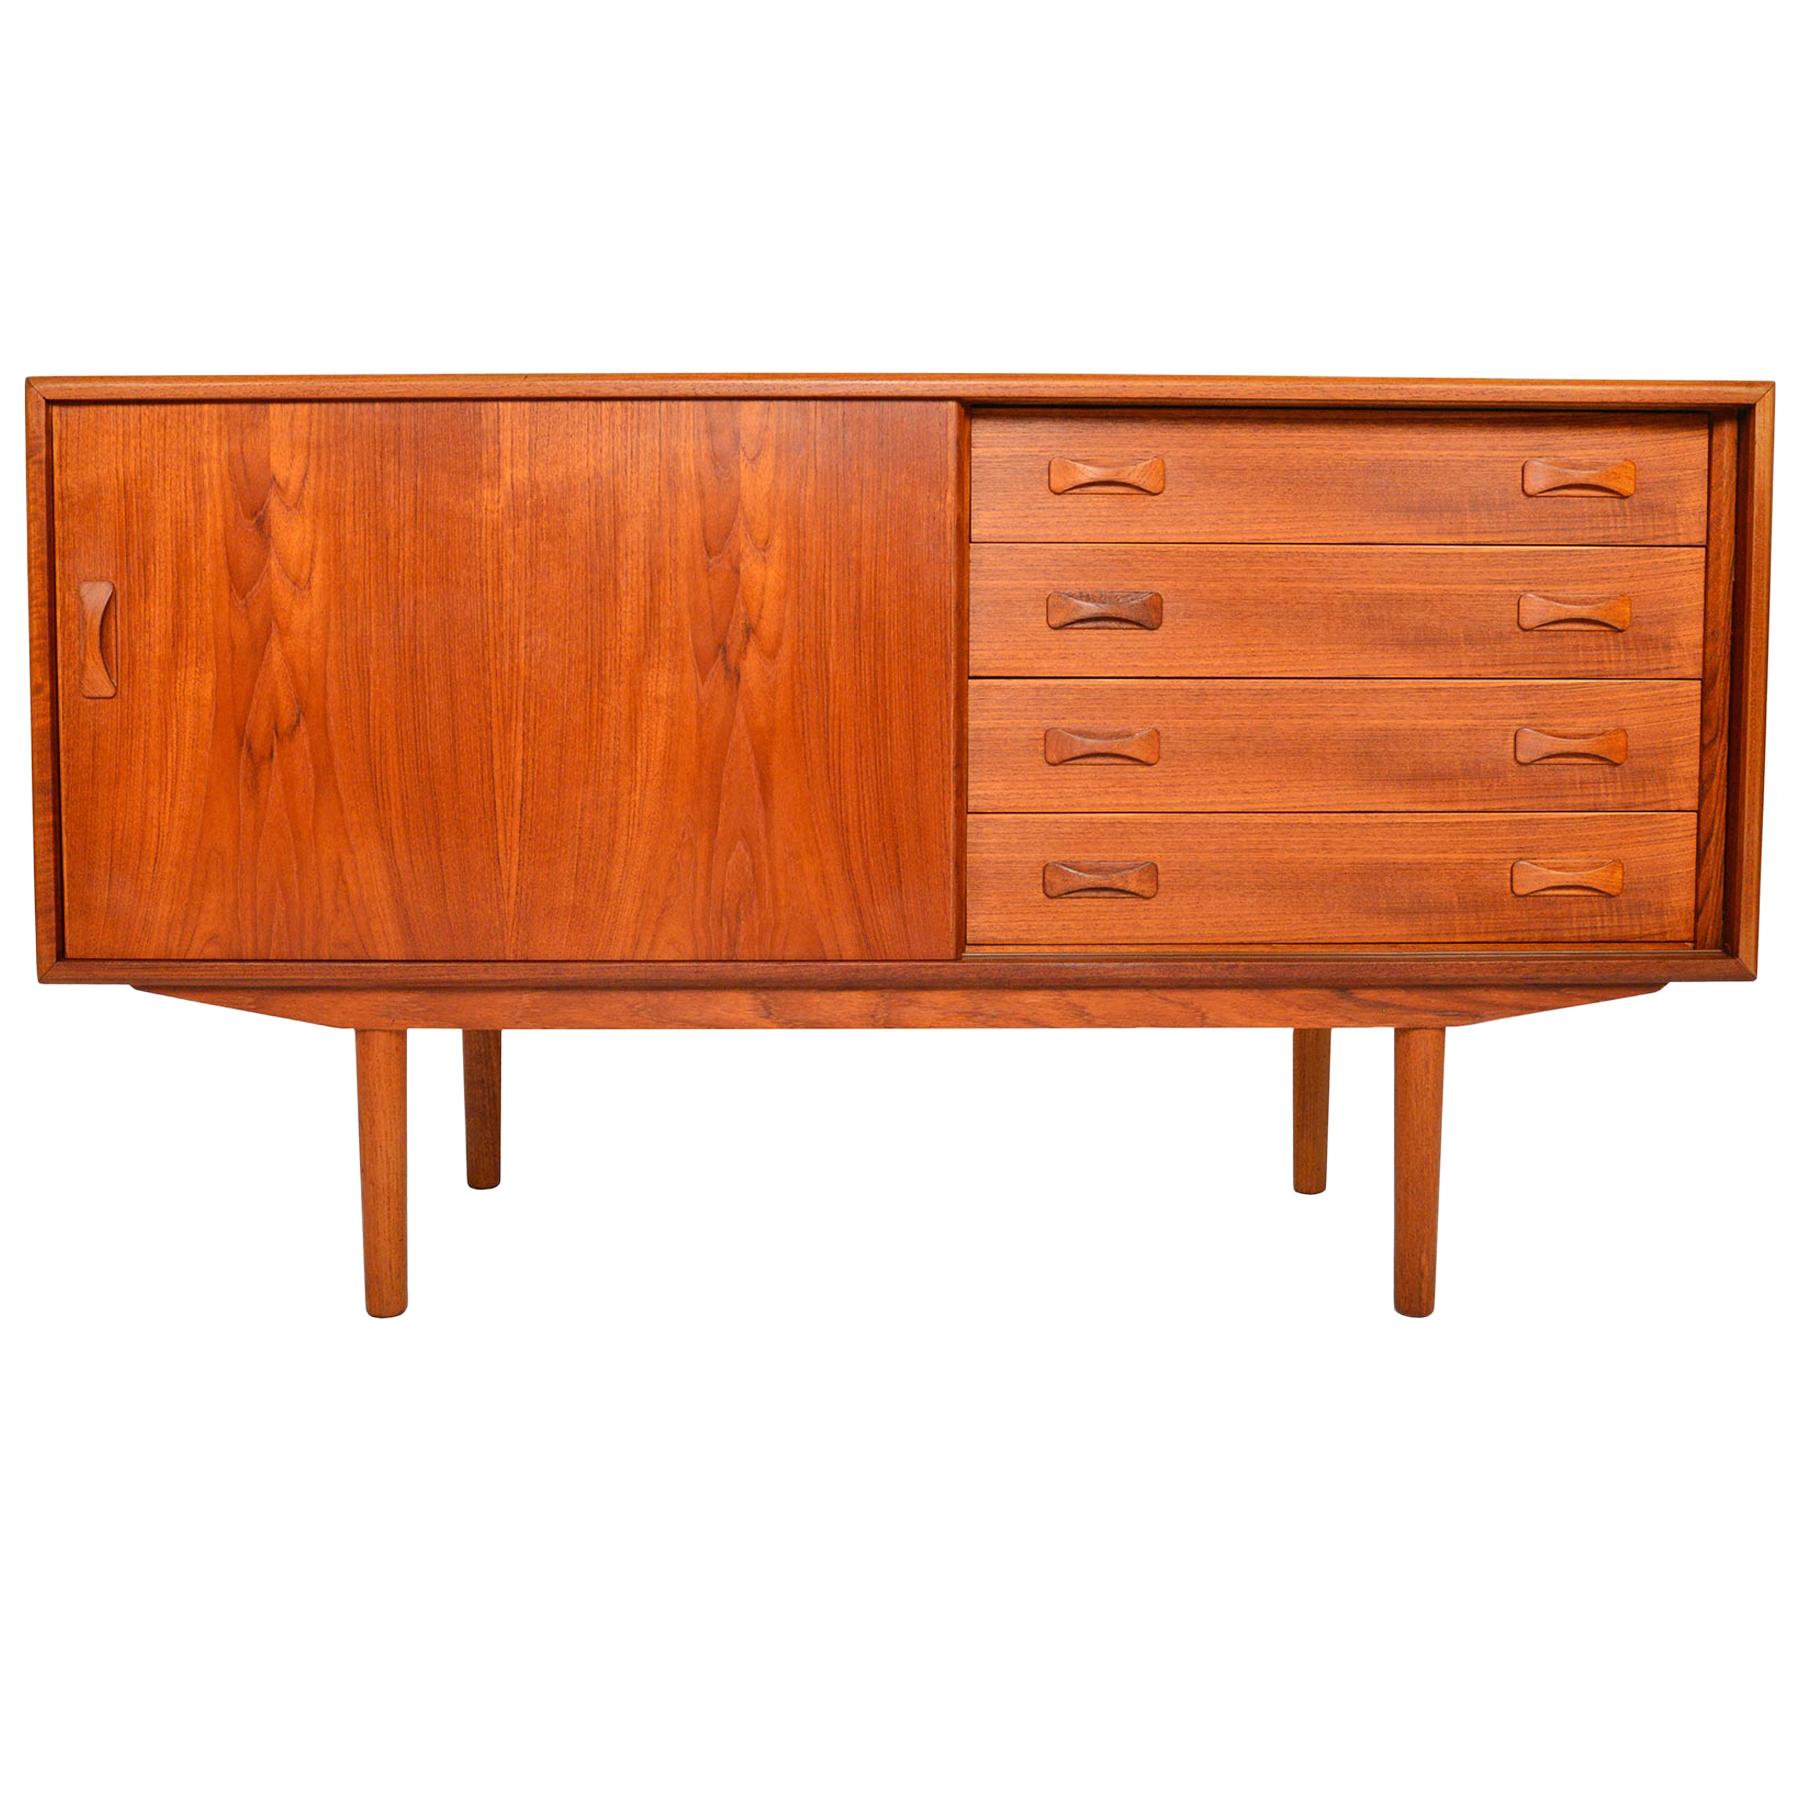 Small Midcentury Teak Sliding Door Credenza by Clausen and Søn